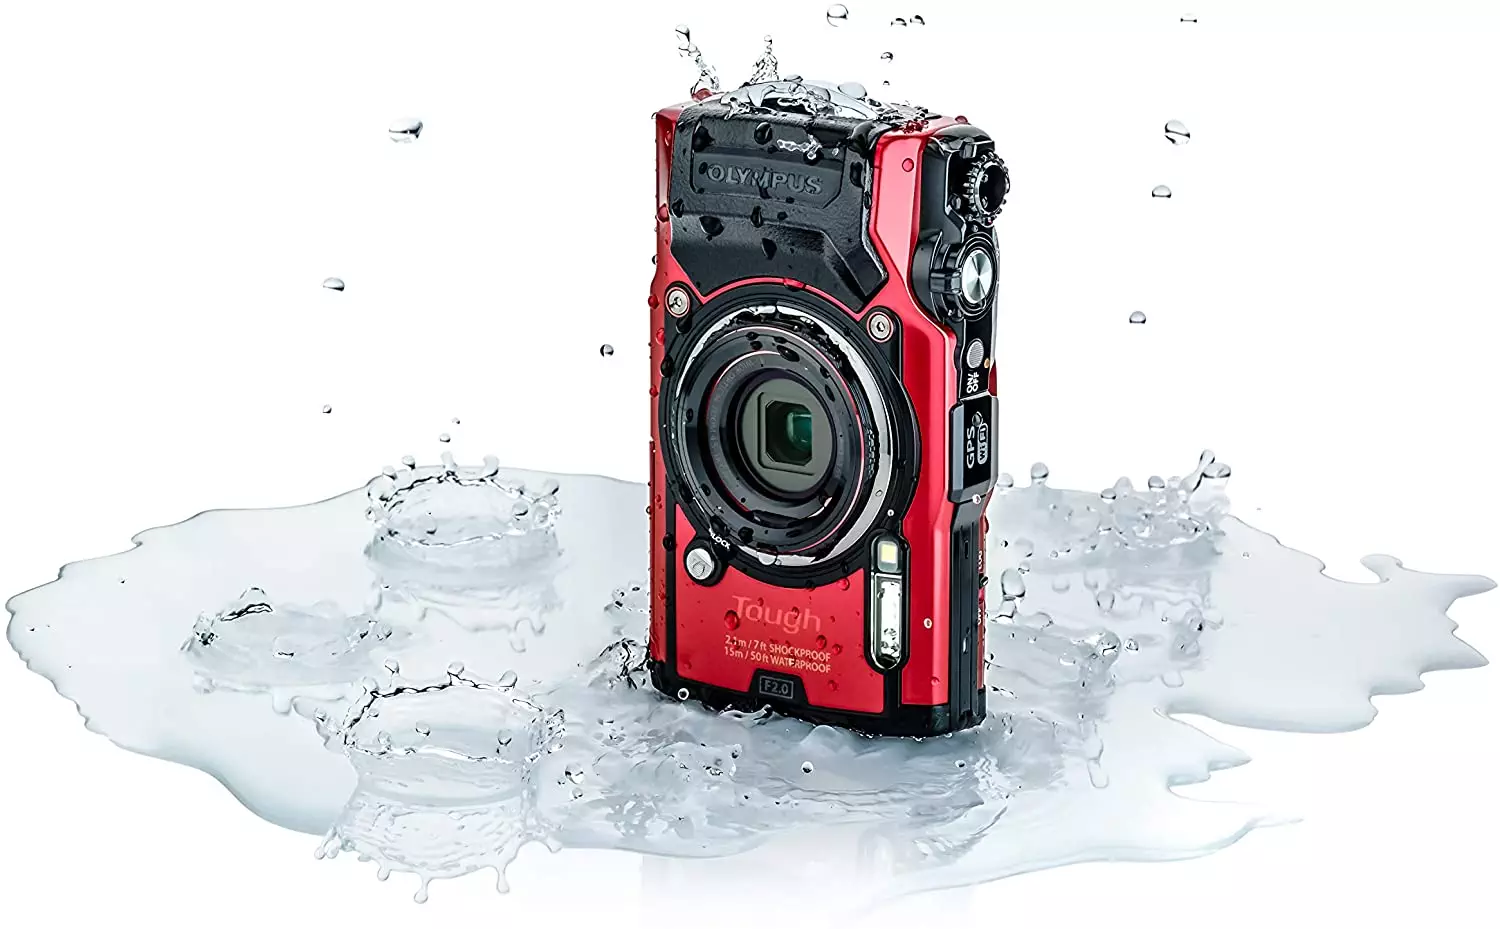 The Extreme Olympus Tough Tg6 Waterproof Camera